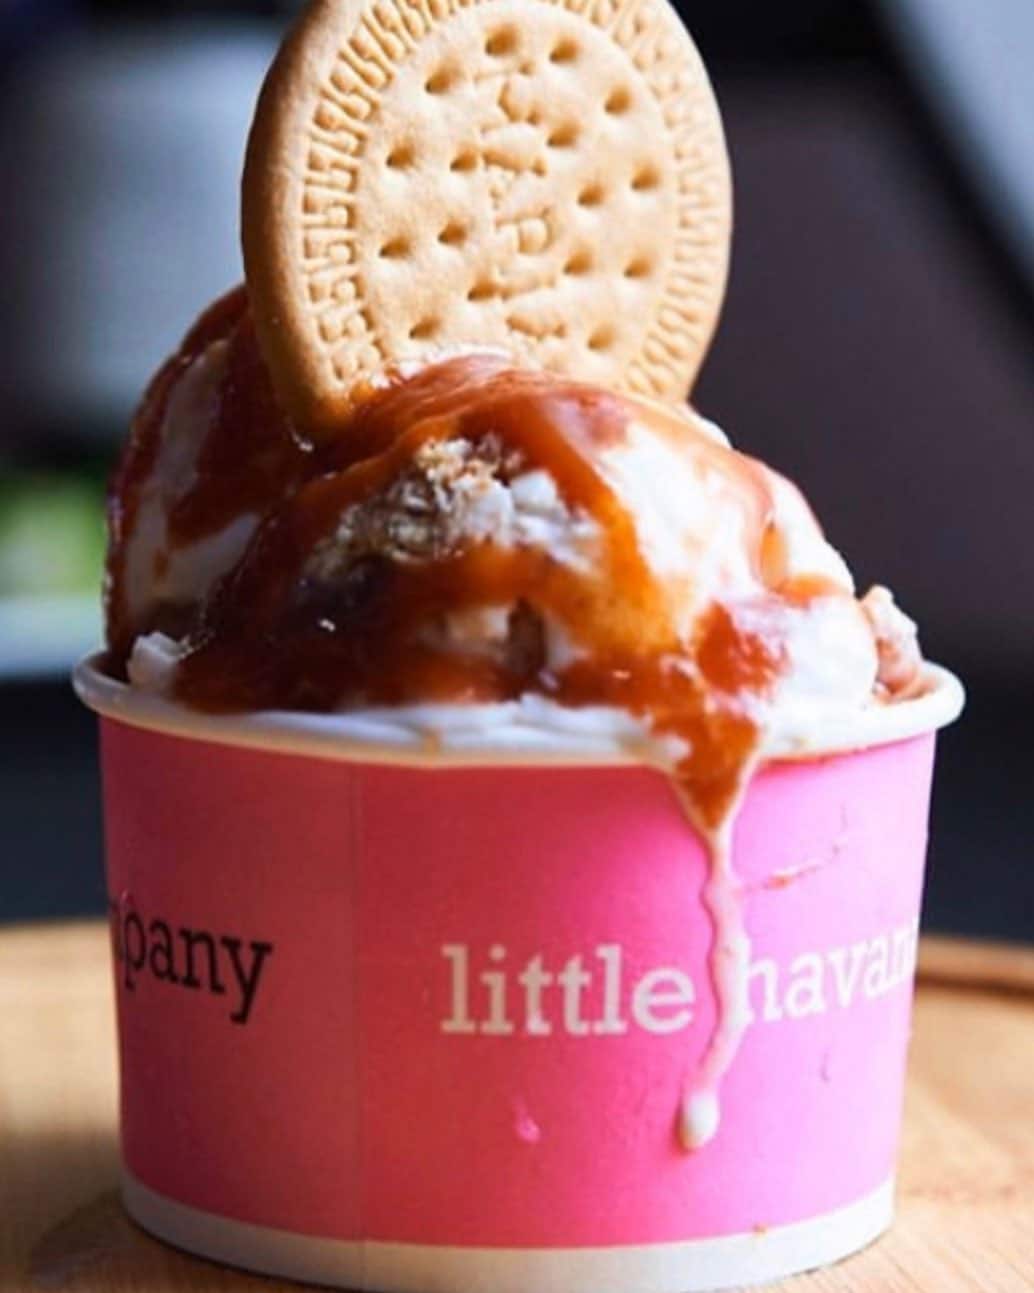 17 Miami Desserts To Order When You're Craving Something Swe